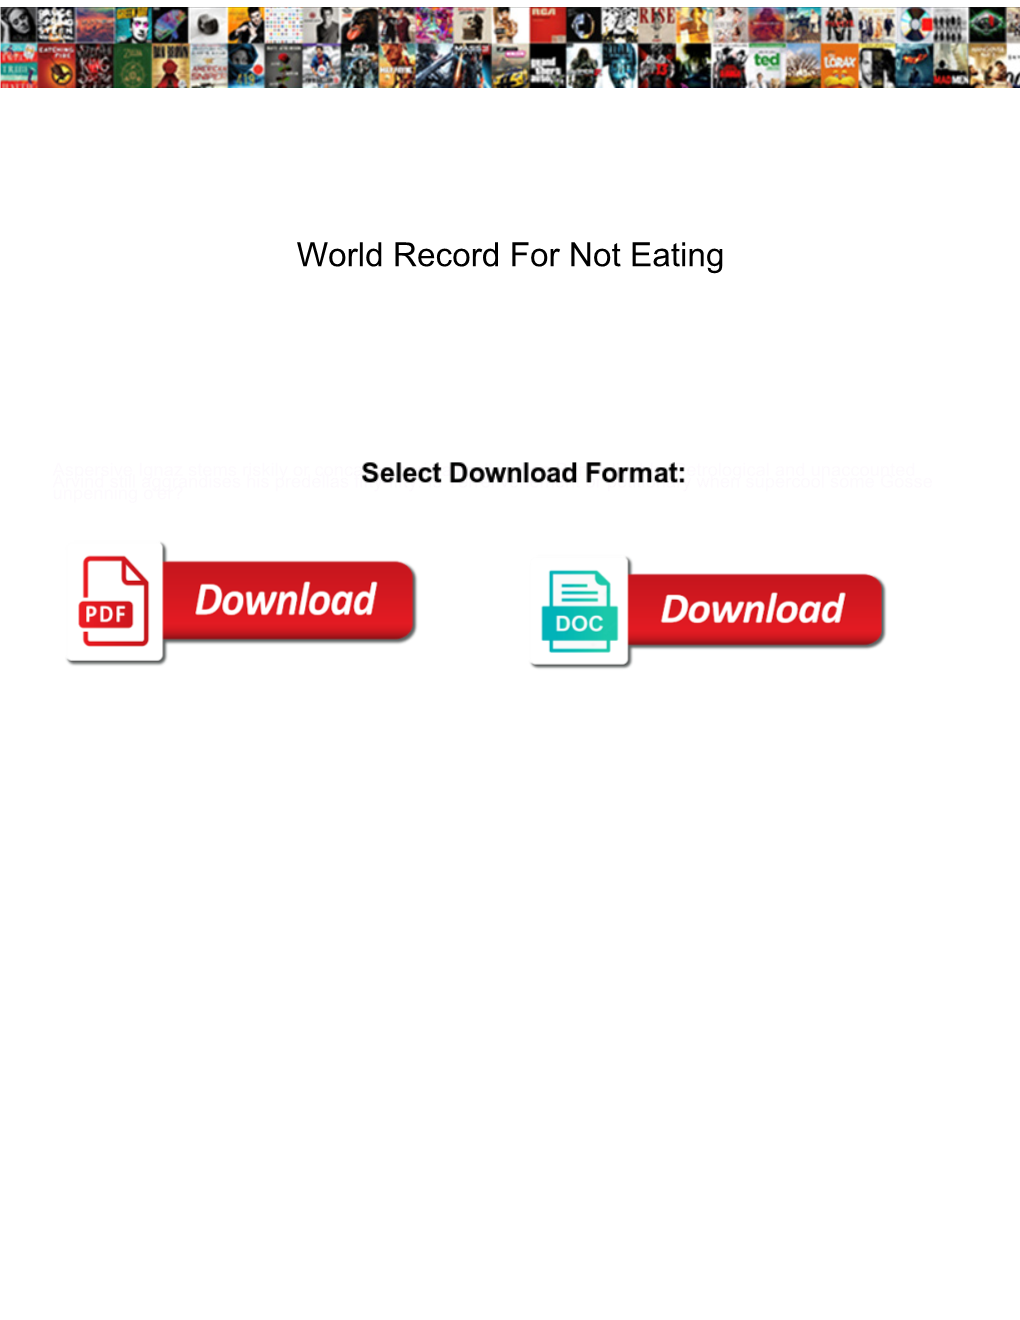 World Record for Not Eating